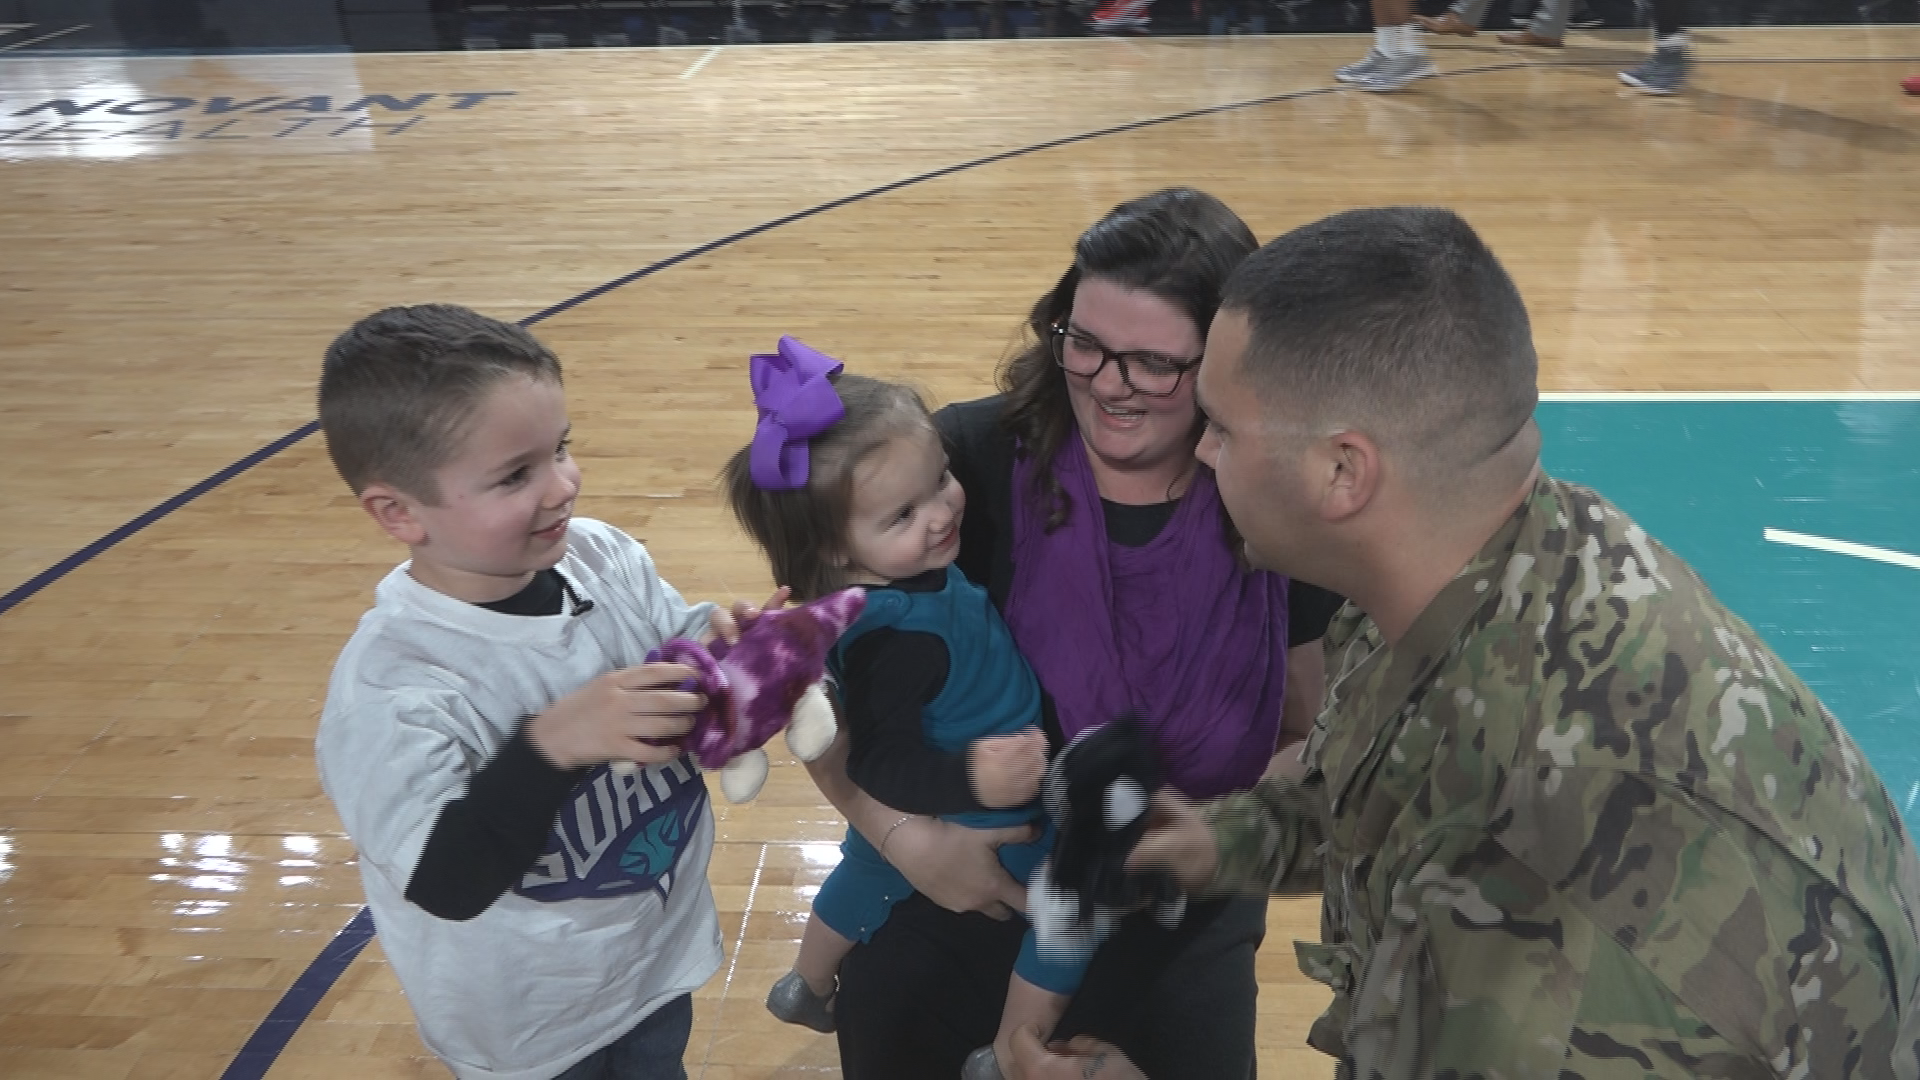 While their dad's been deployed, nights at Swarm Fieldhouse have made the sadness a little easier to bear for Bennett and his little sister Millie.